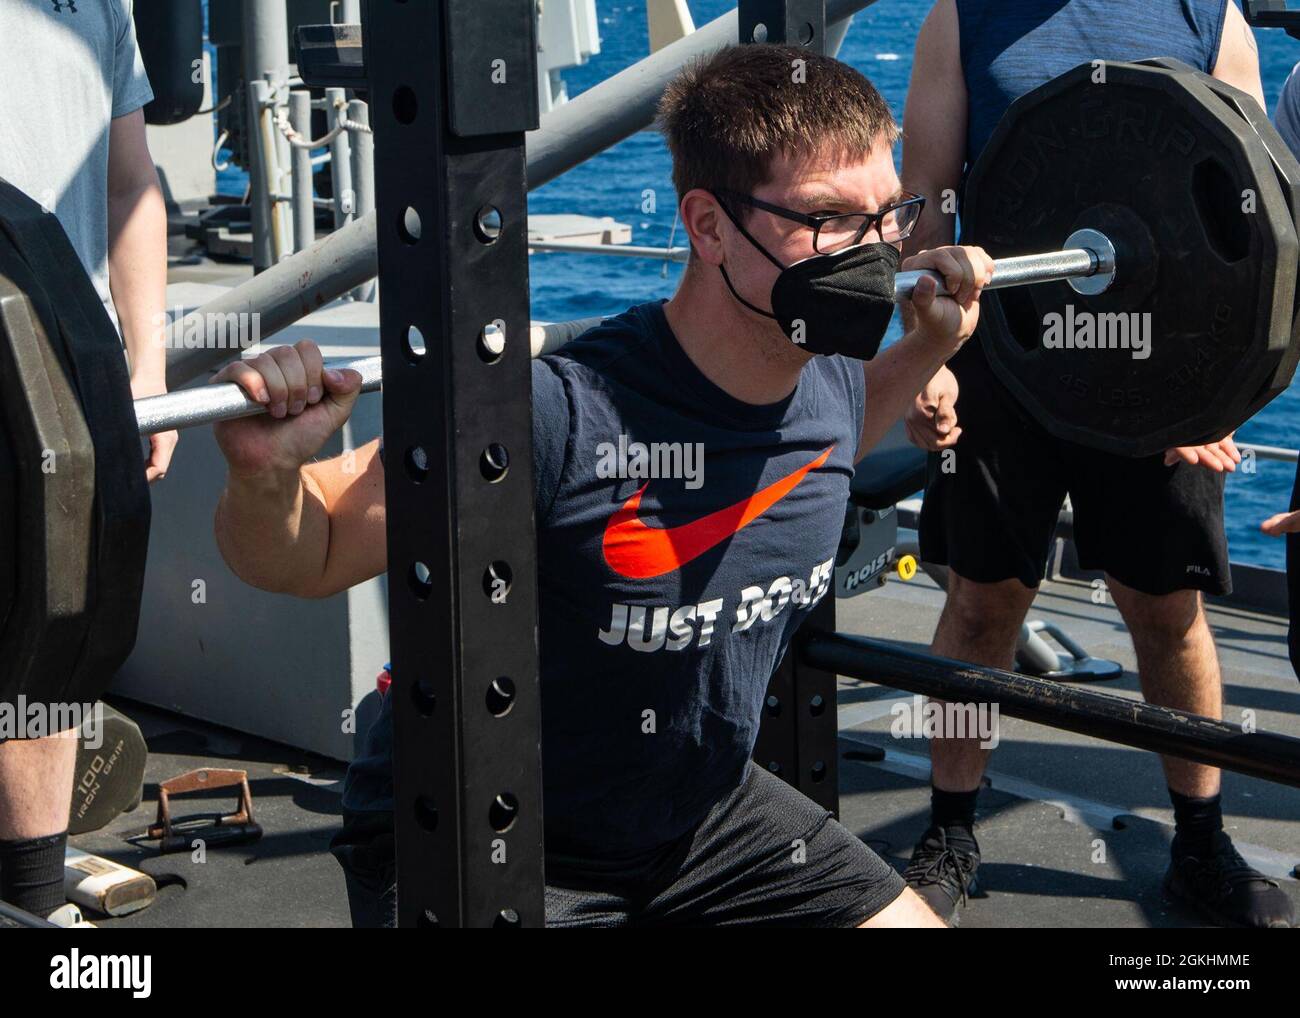 210425-N-RG587-1029 ATLANTIC OCEAN (April 25, 2021) Fire Controlman (Aeigis) 2nd Class Steven Brinker, from Johnstown, Ohio, competes in a weight-lifting competition aboard the Ticonderoga-class guided-missile cruiser USS Vella Gulf (CG 72), April 25, 2021. Vella Gulf is operating in the Atlantic Ocean in support of naval operations to maintain maritime stability and security in order to ensure access, deter aggression and defend U.S., allied and partner interests. Stock Photo